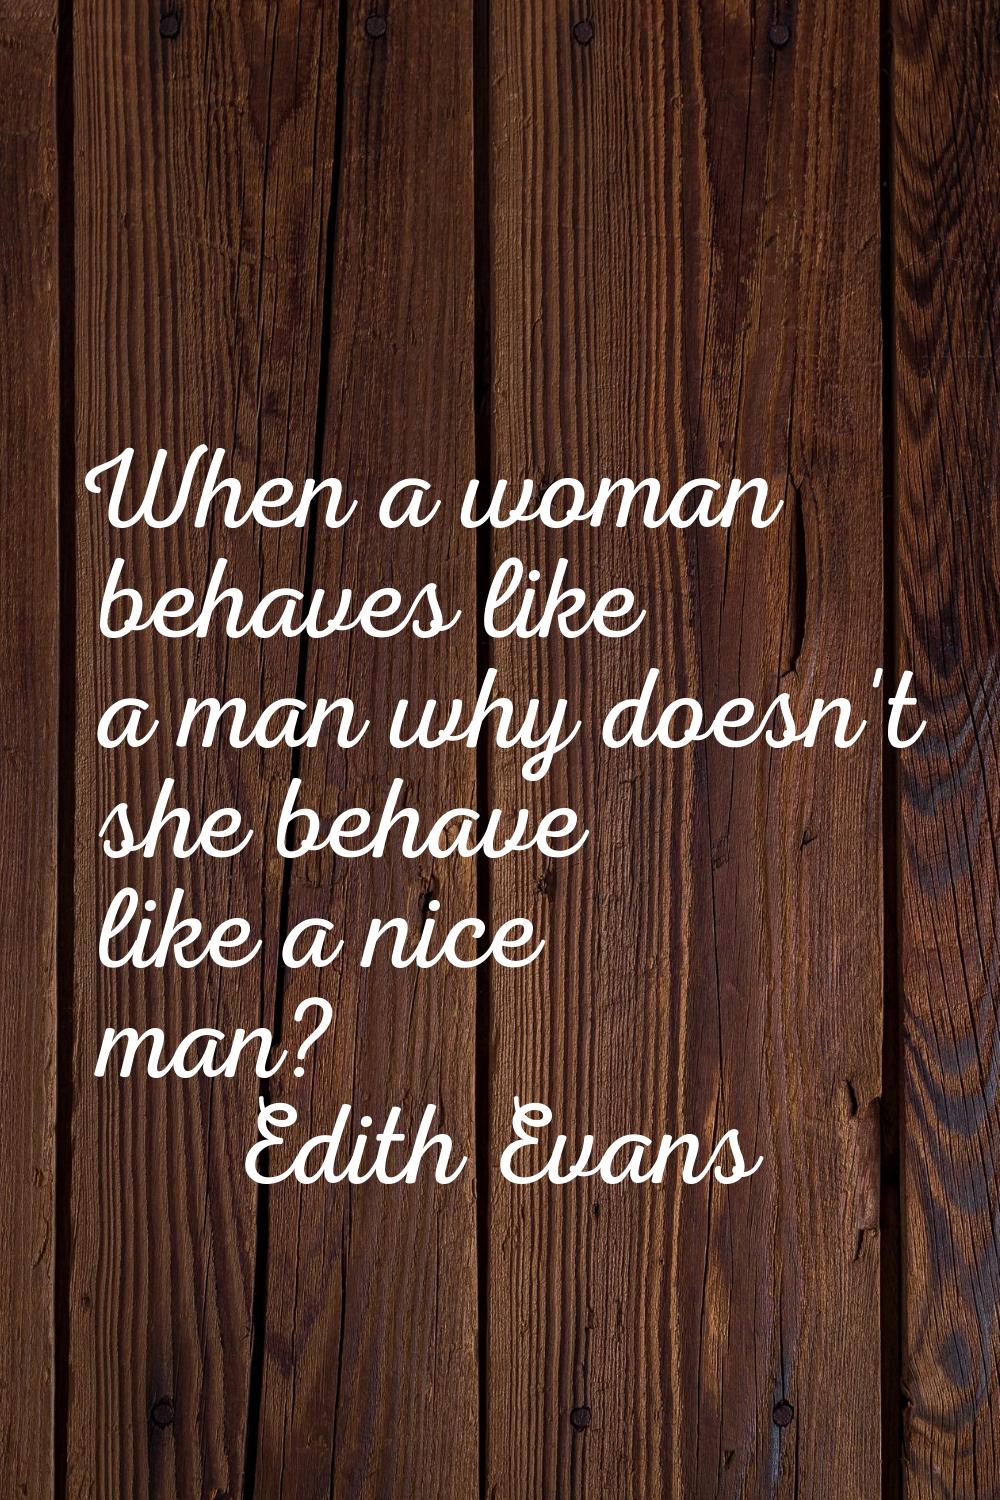 When a woman behaves like a man why doesn't she behave like a nice man?